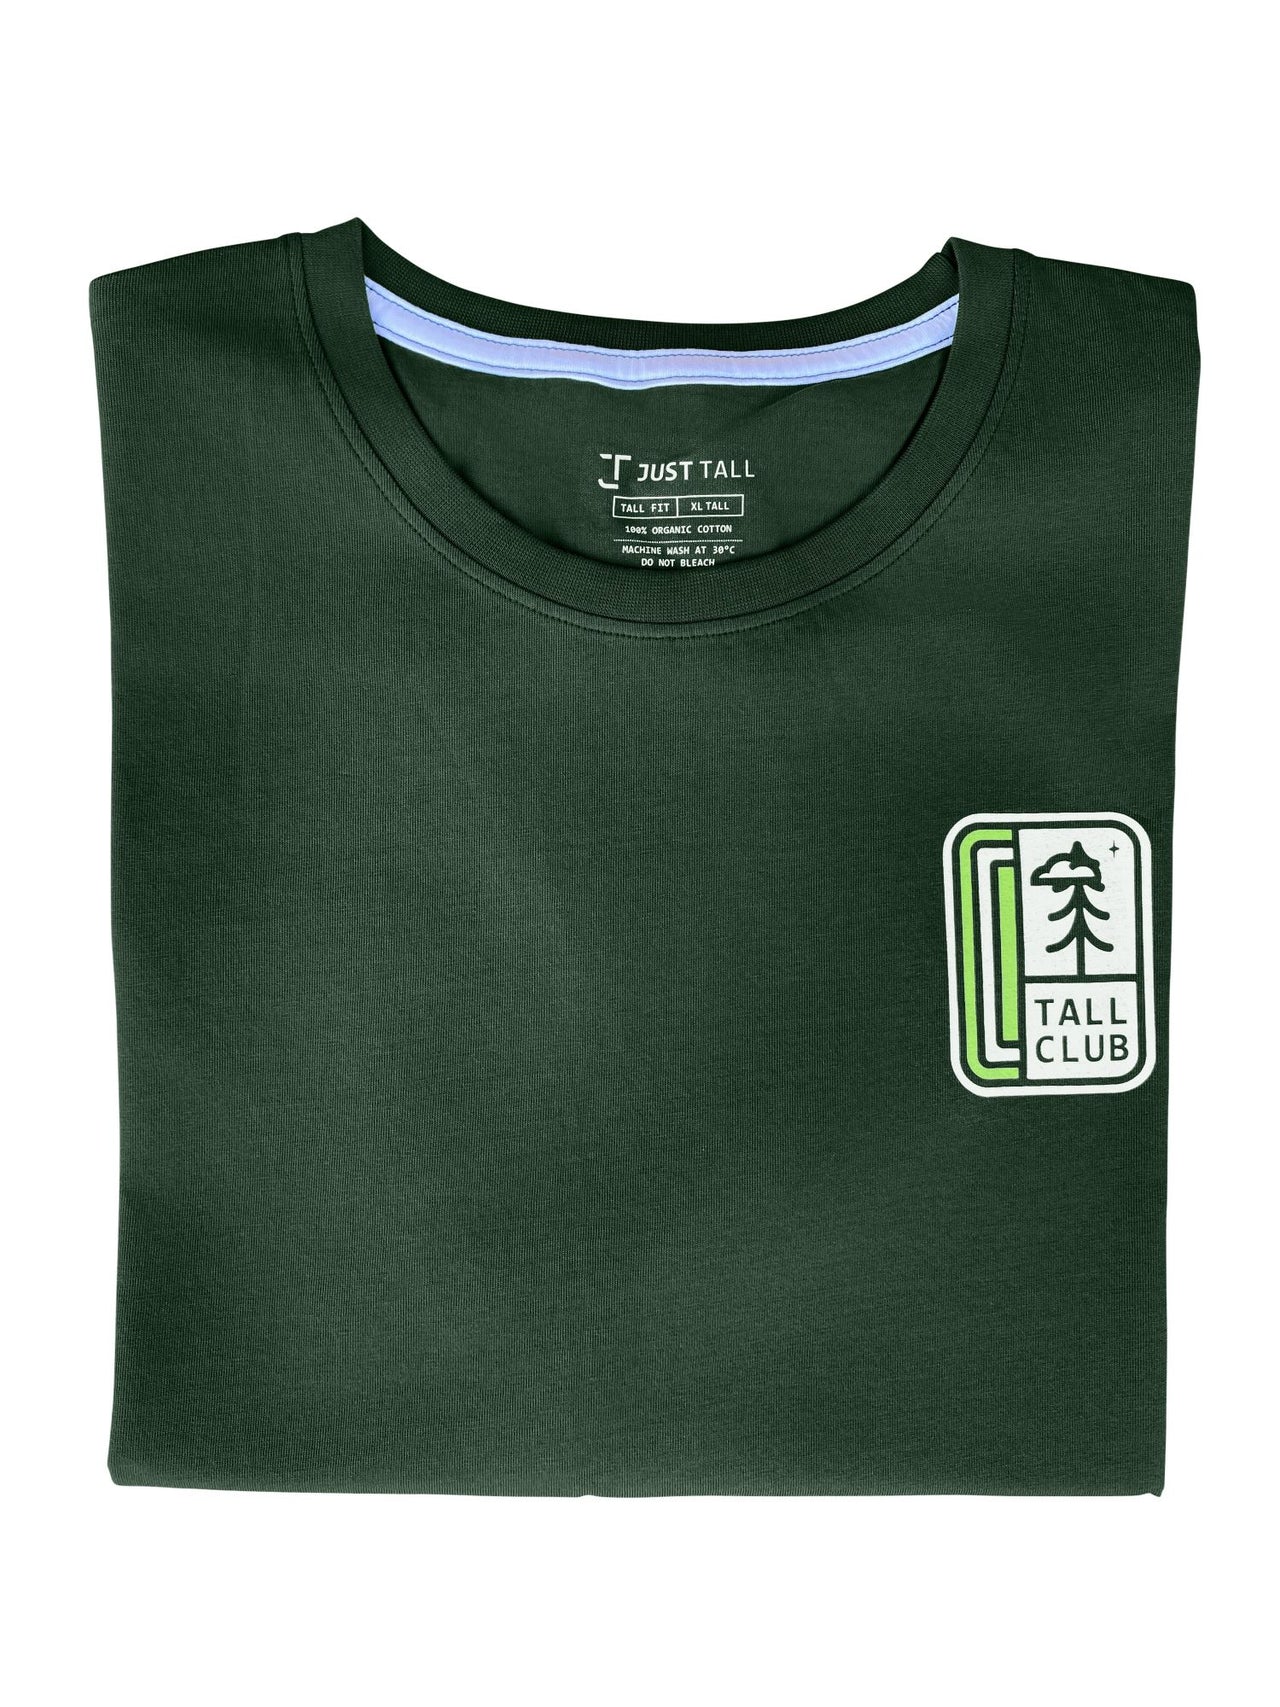 A close up of a tall green graphic t-shirt.